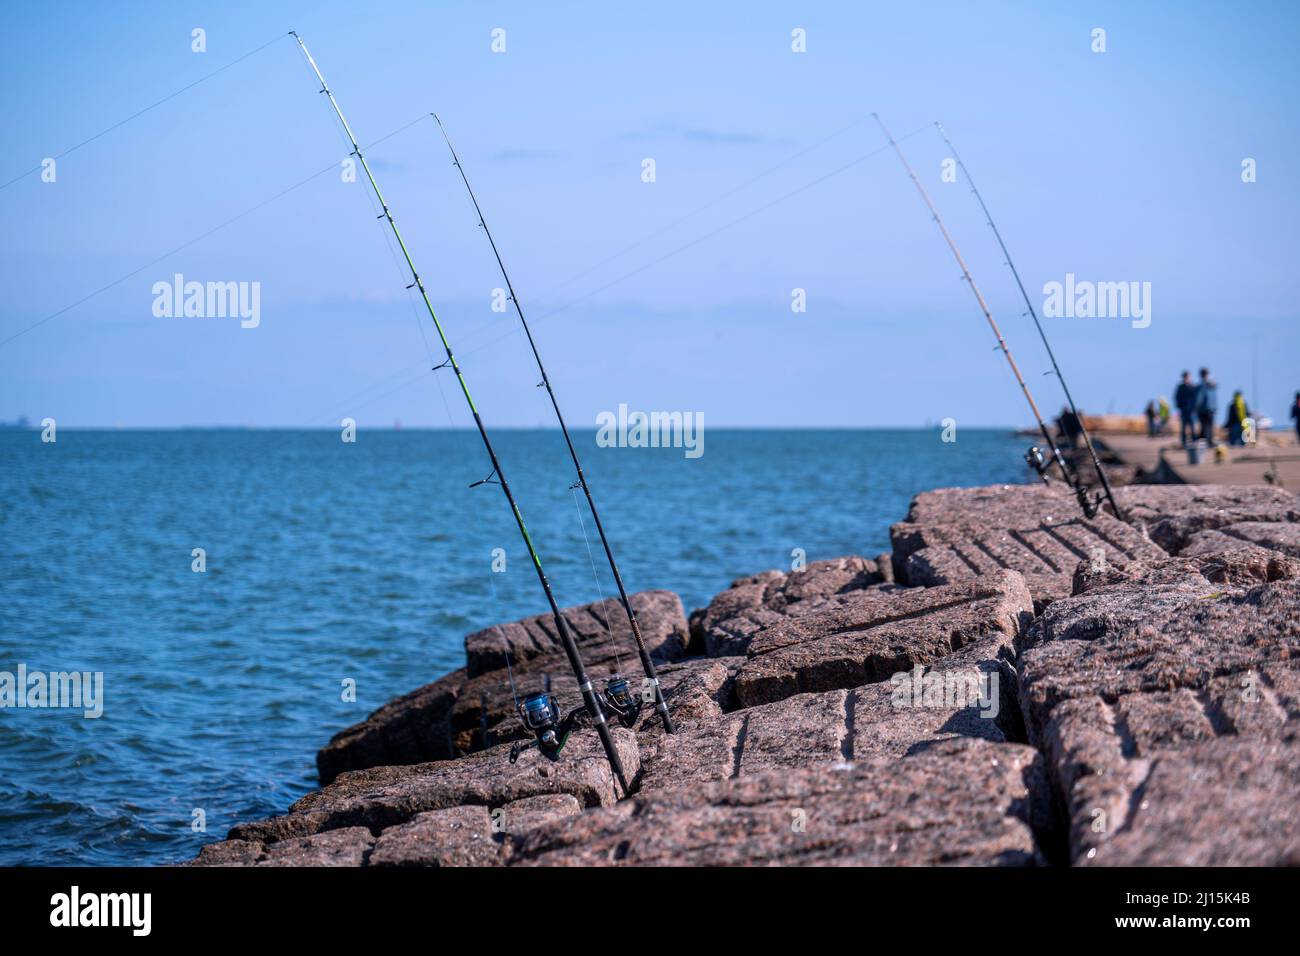 Fishing rods and reels in Port Aransas, Texas on popular jetty at the Gulf of Mexico with waves on the water. Stock Photo